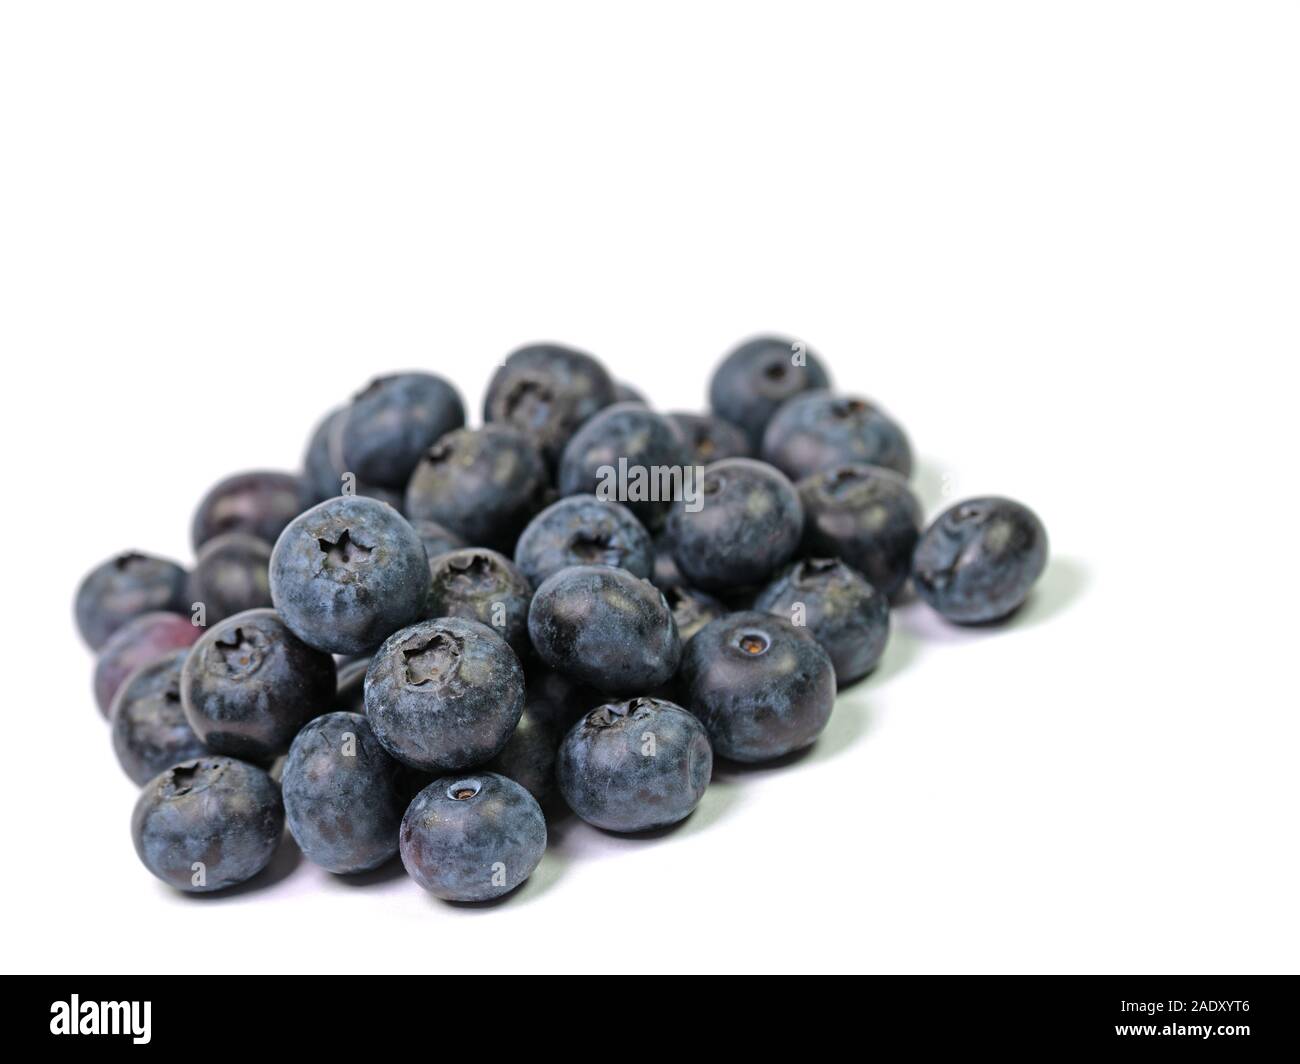 Blueberries isolated against white background Stock Photo